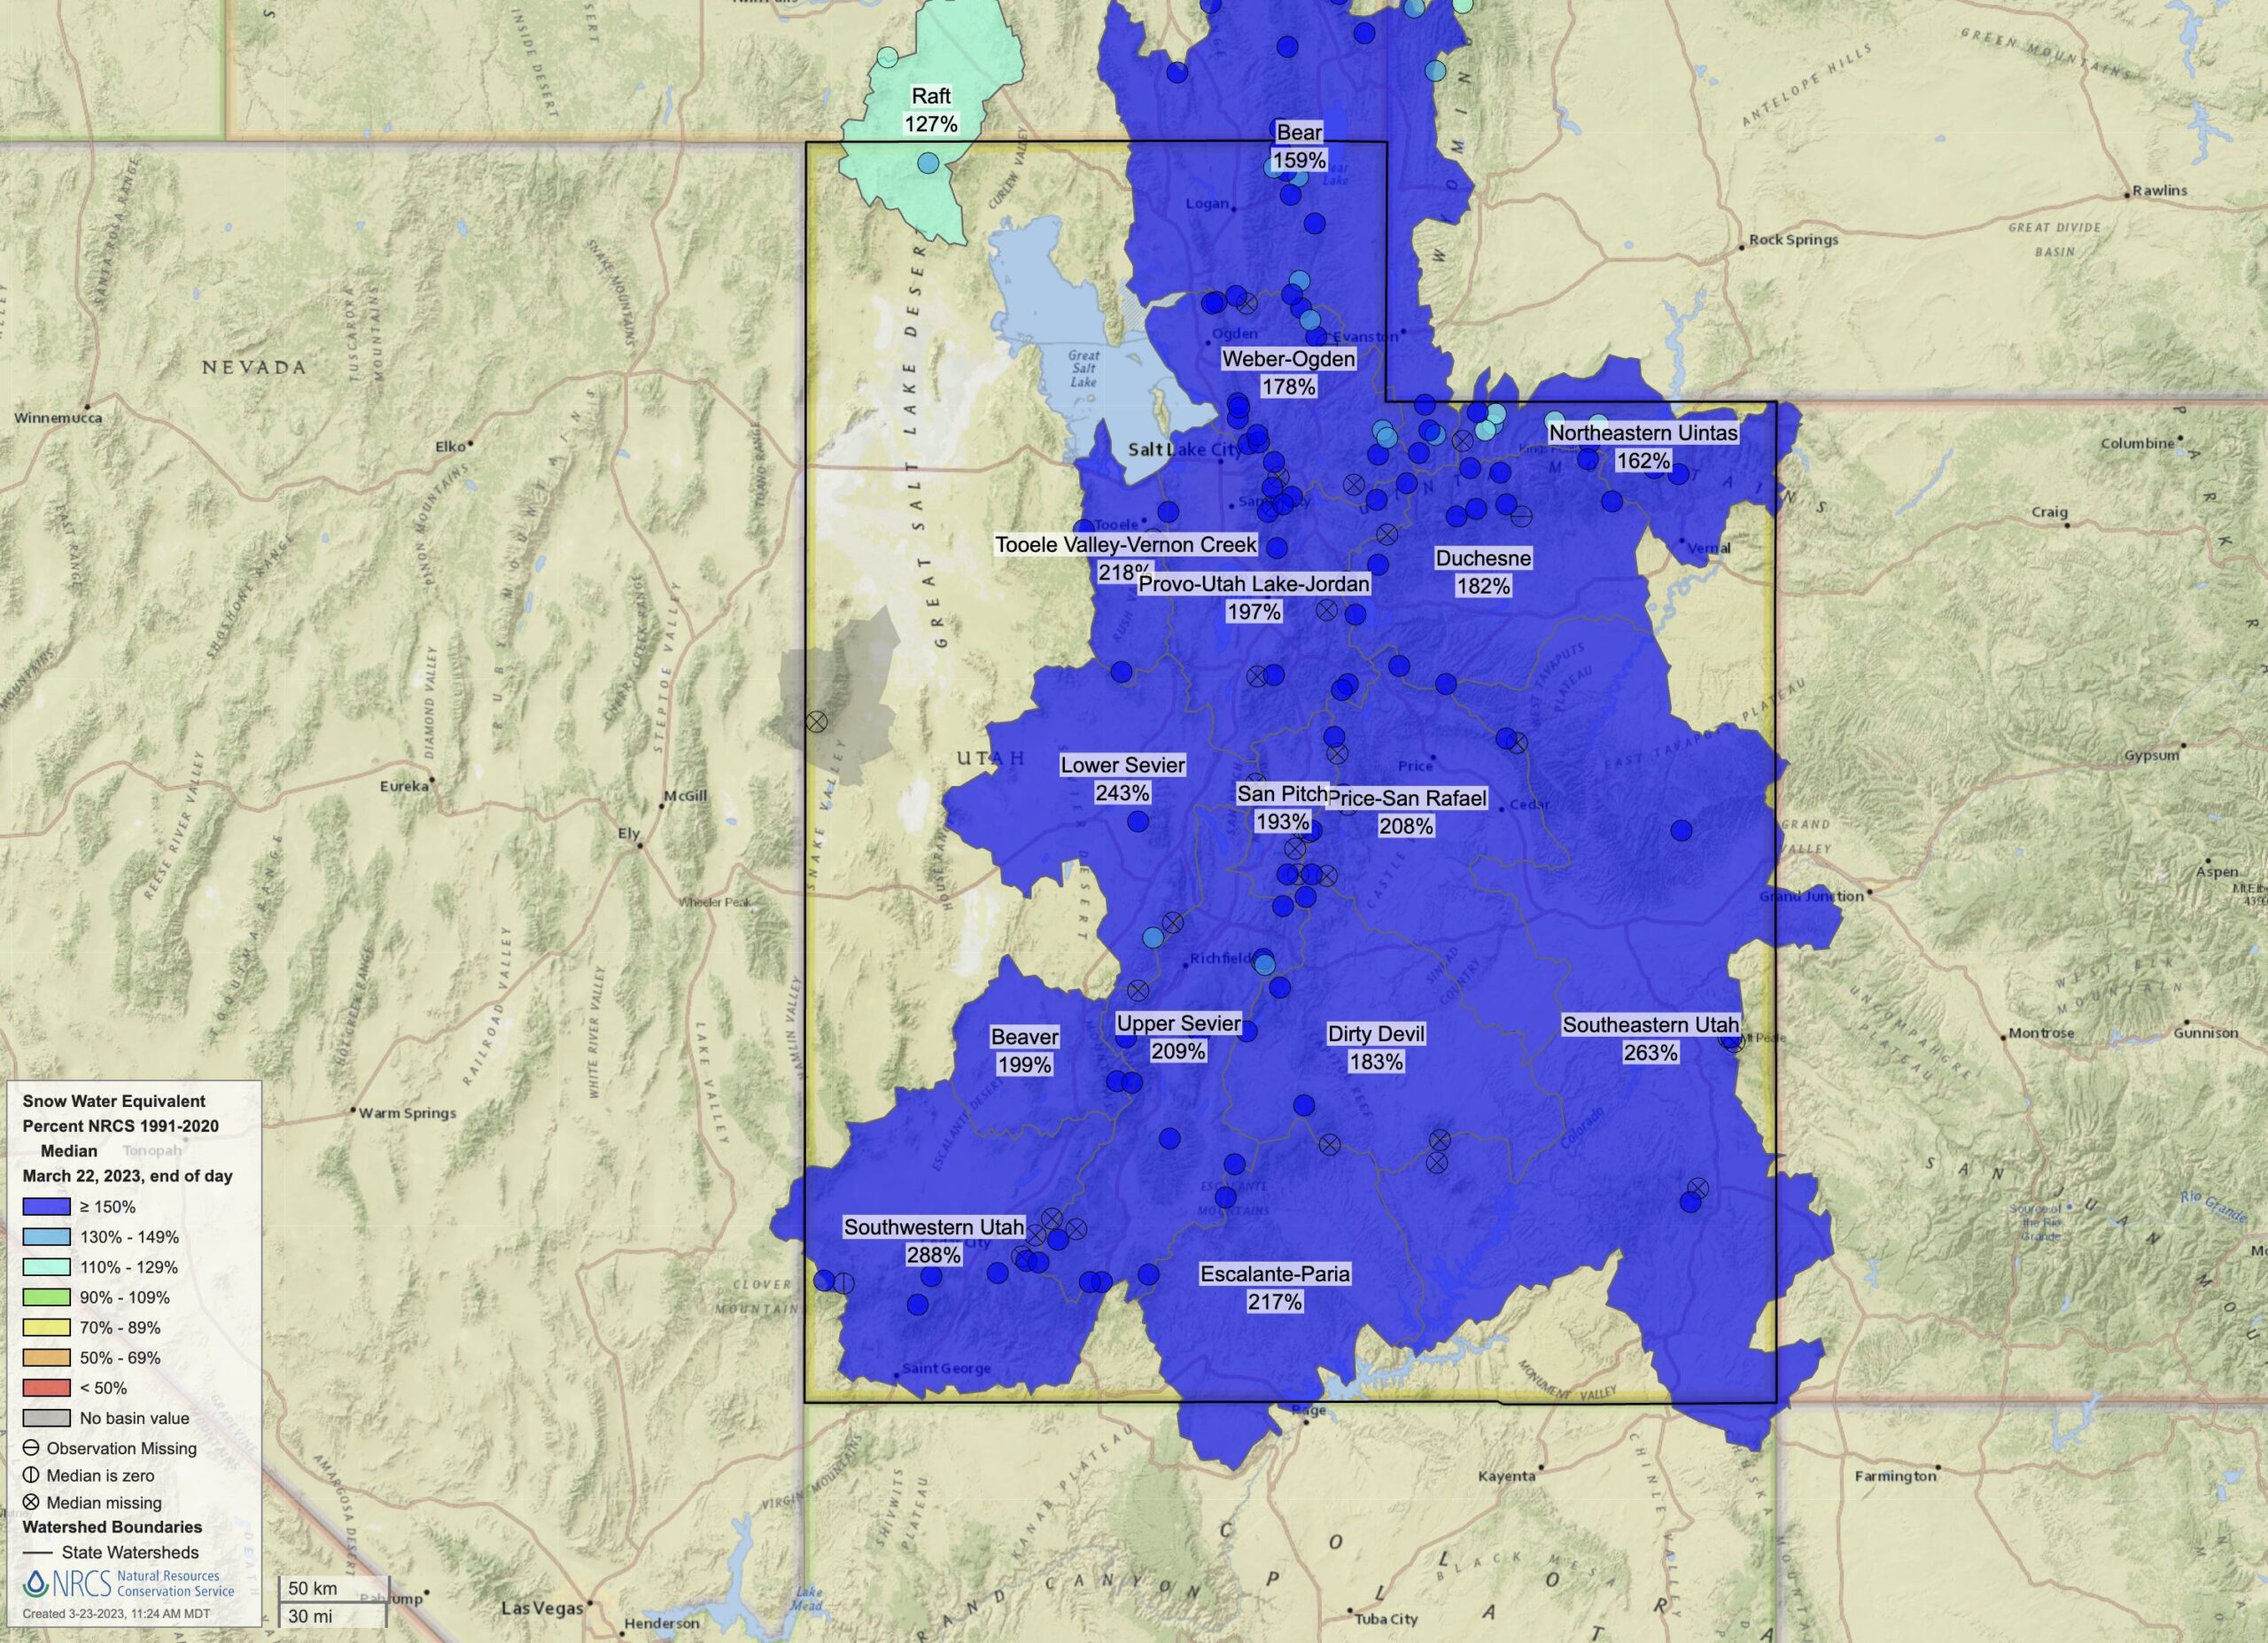 Snow Water Equivalent of snowpack as a percent of the 1991-2020 median.